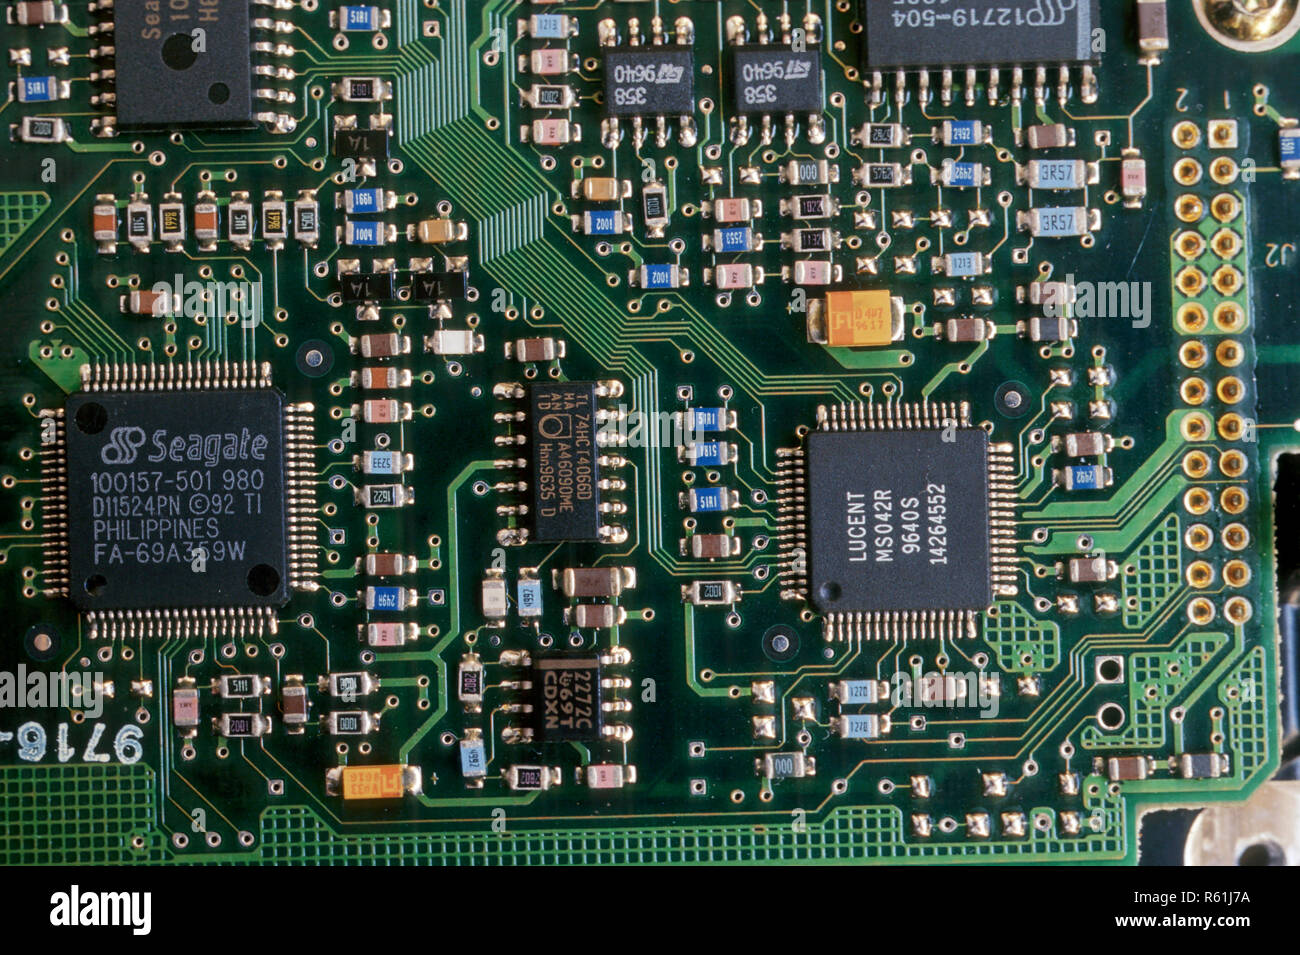 Motherboard of a computer Stock Photo